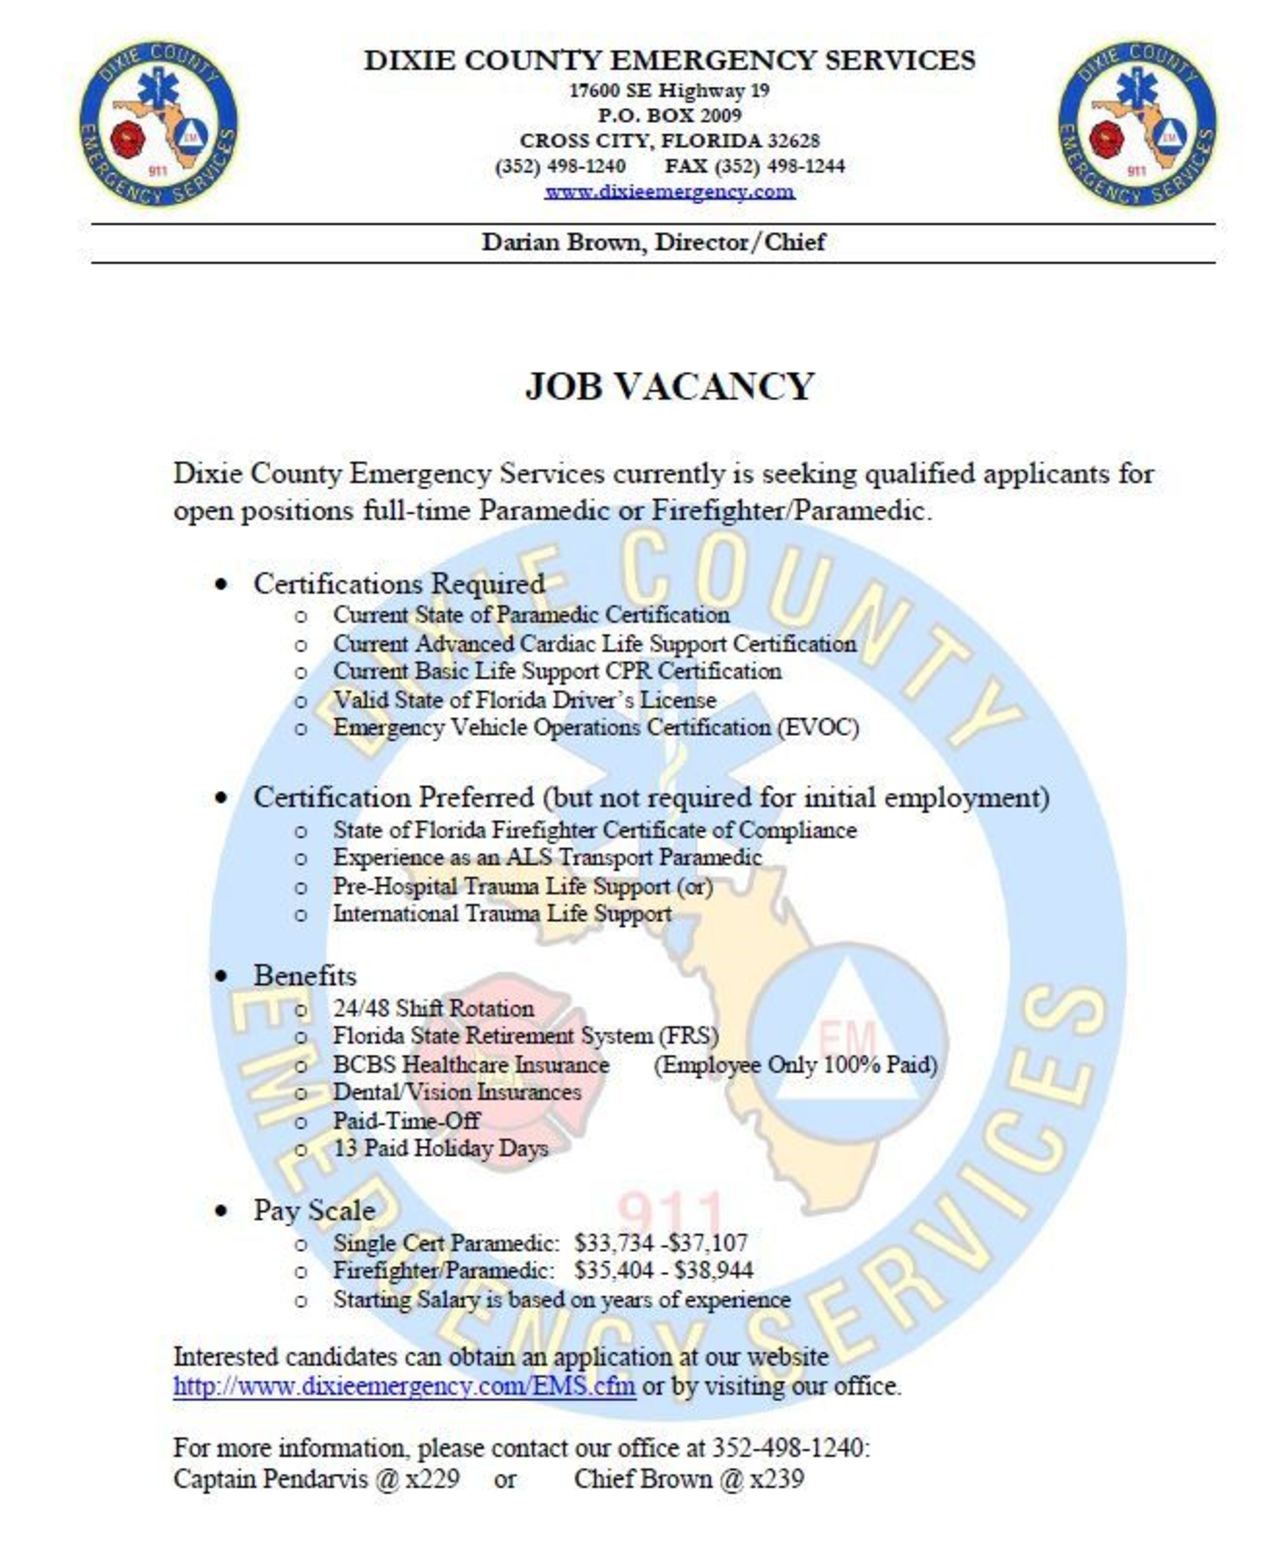 Dixie County Emergency Services Hiring Paramedic or FF/Medic